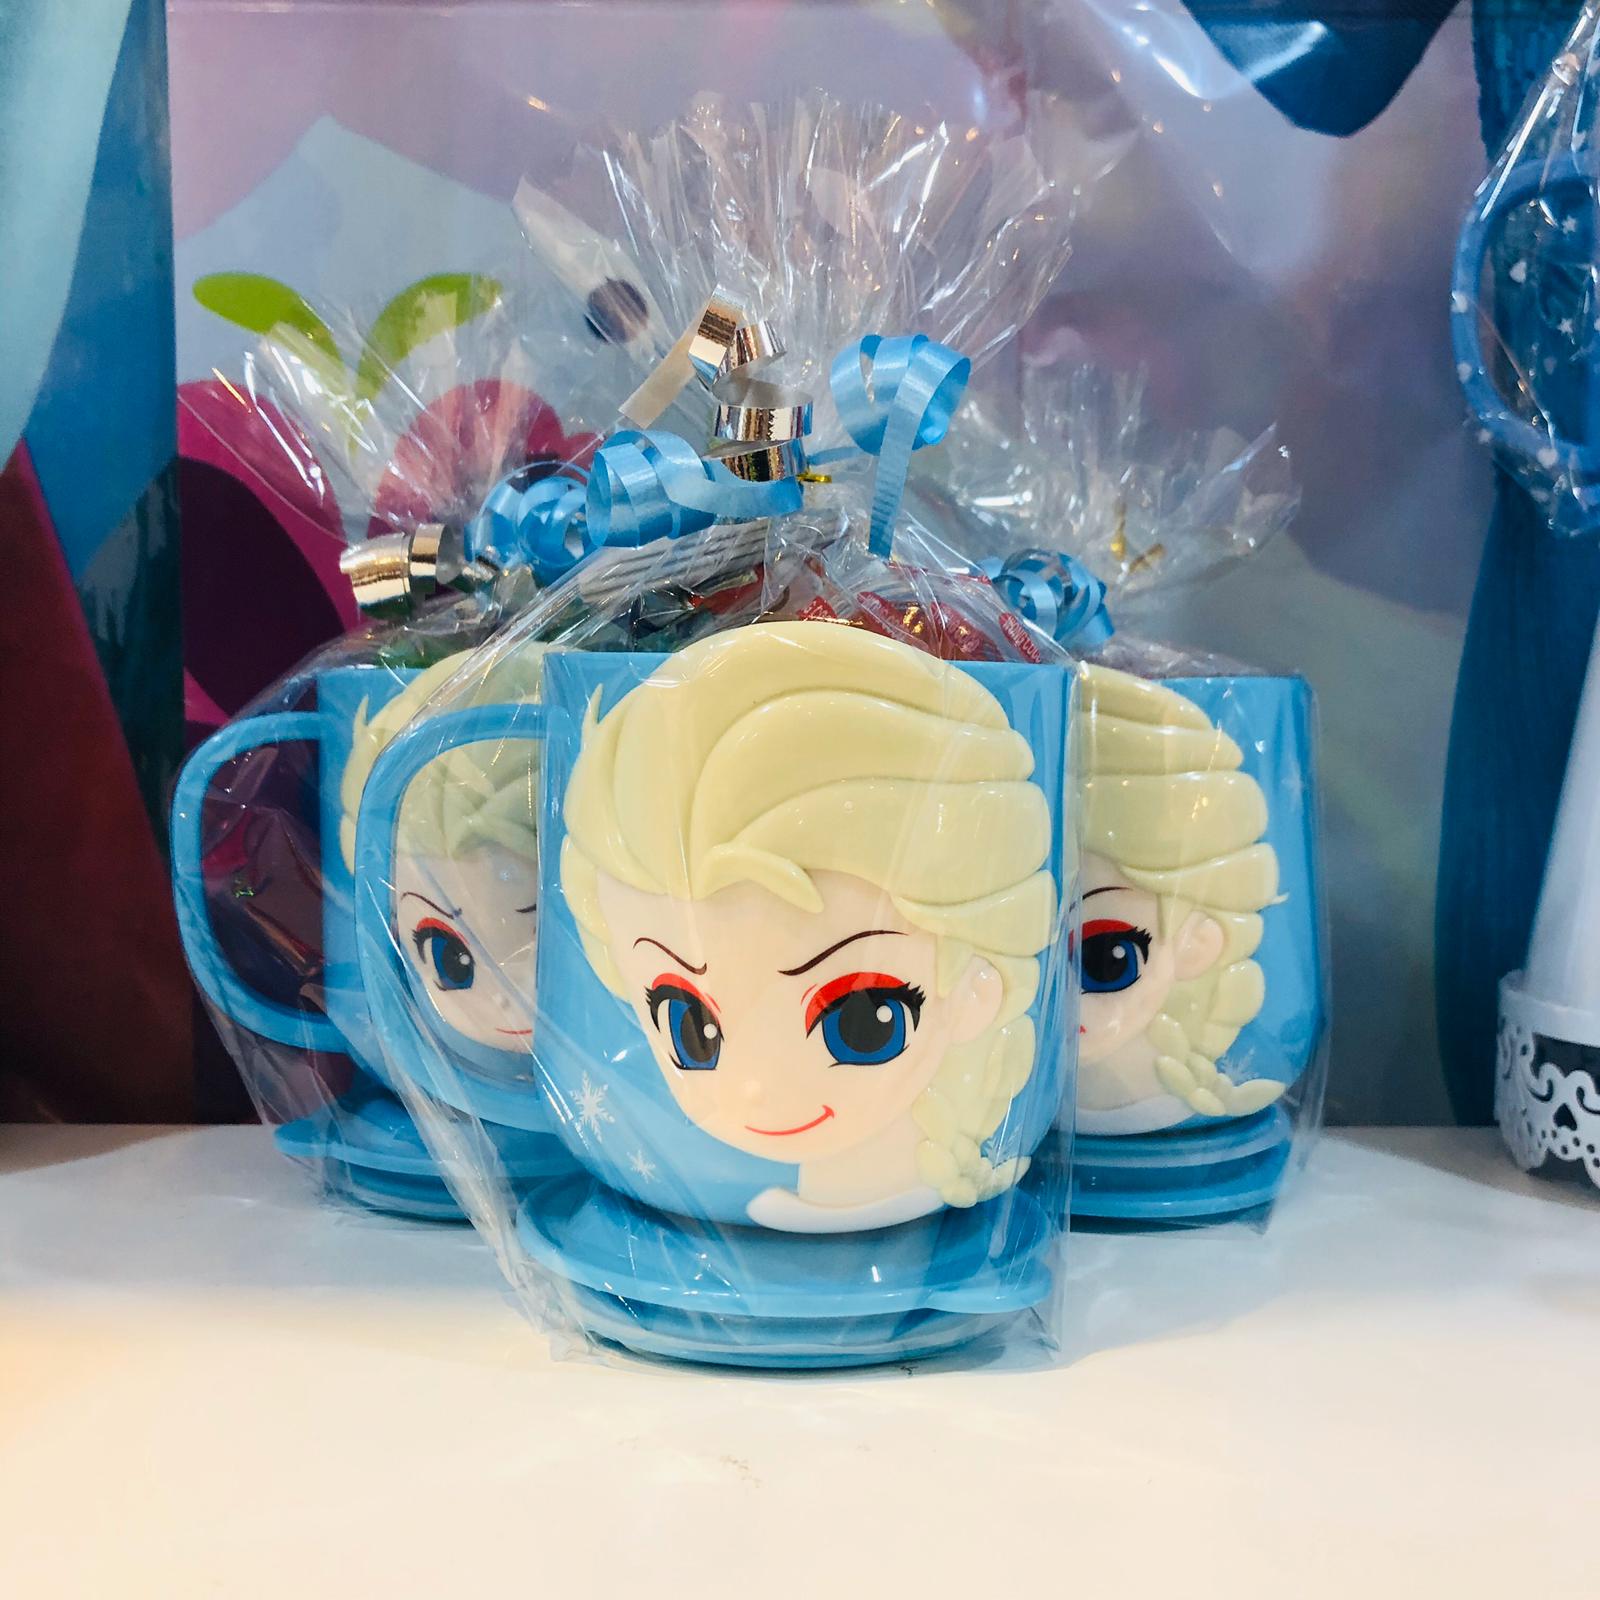 Return Gifts For Frozen Theme Party